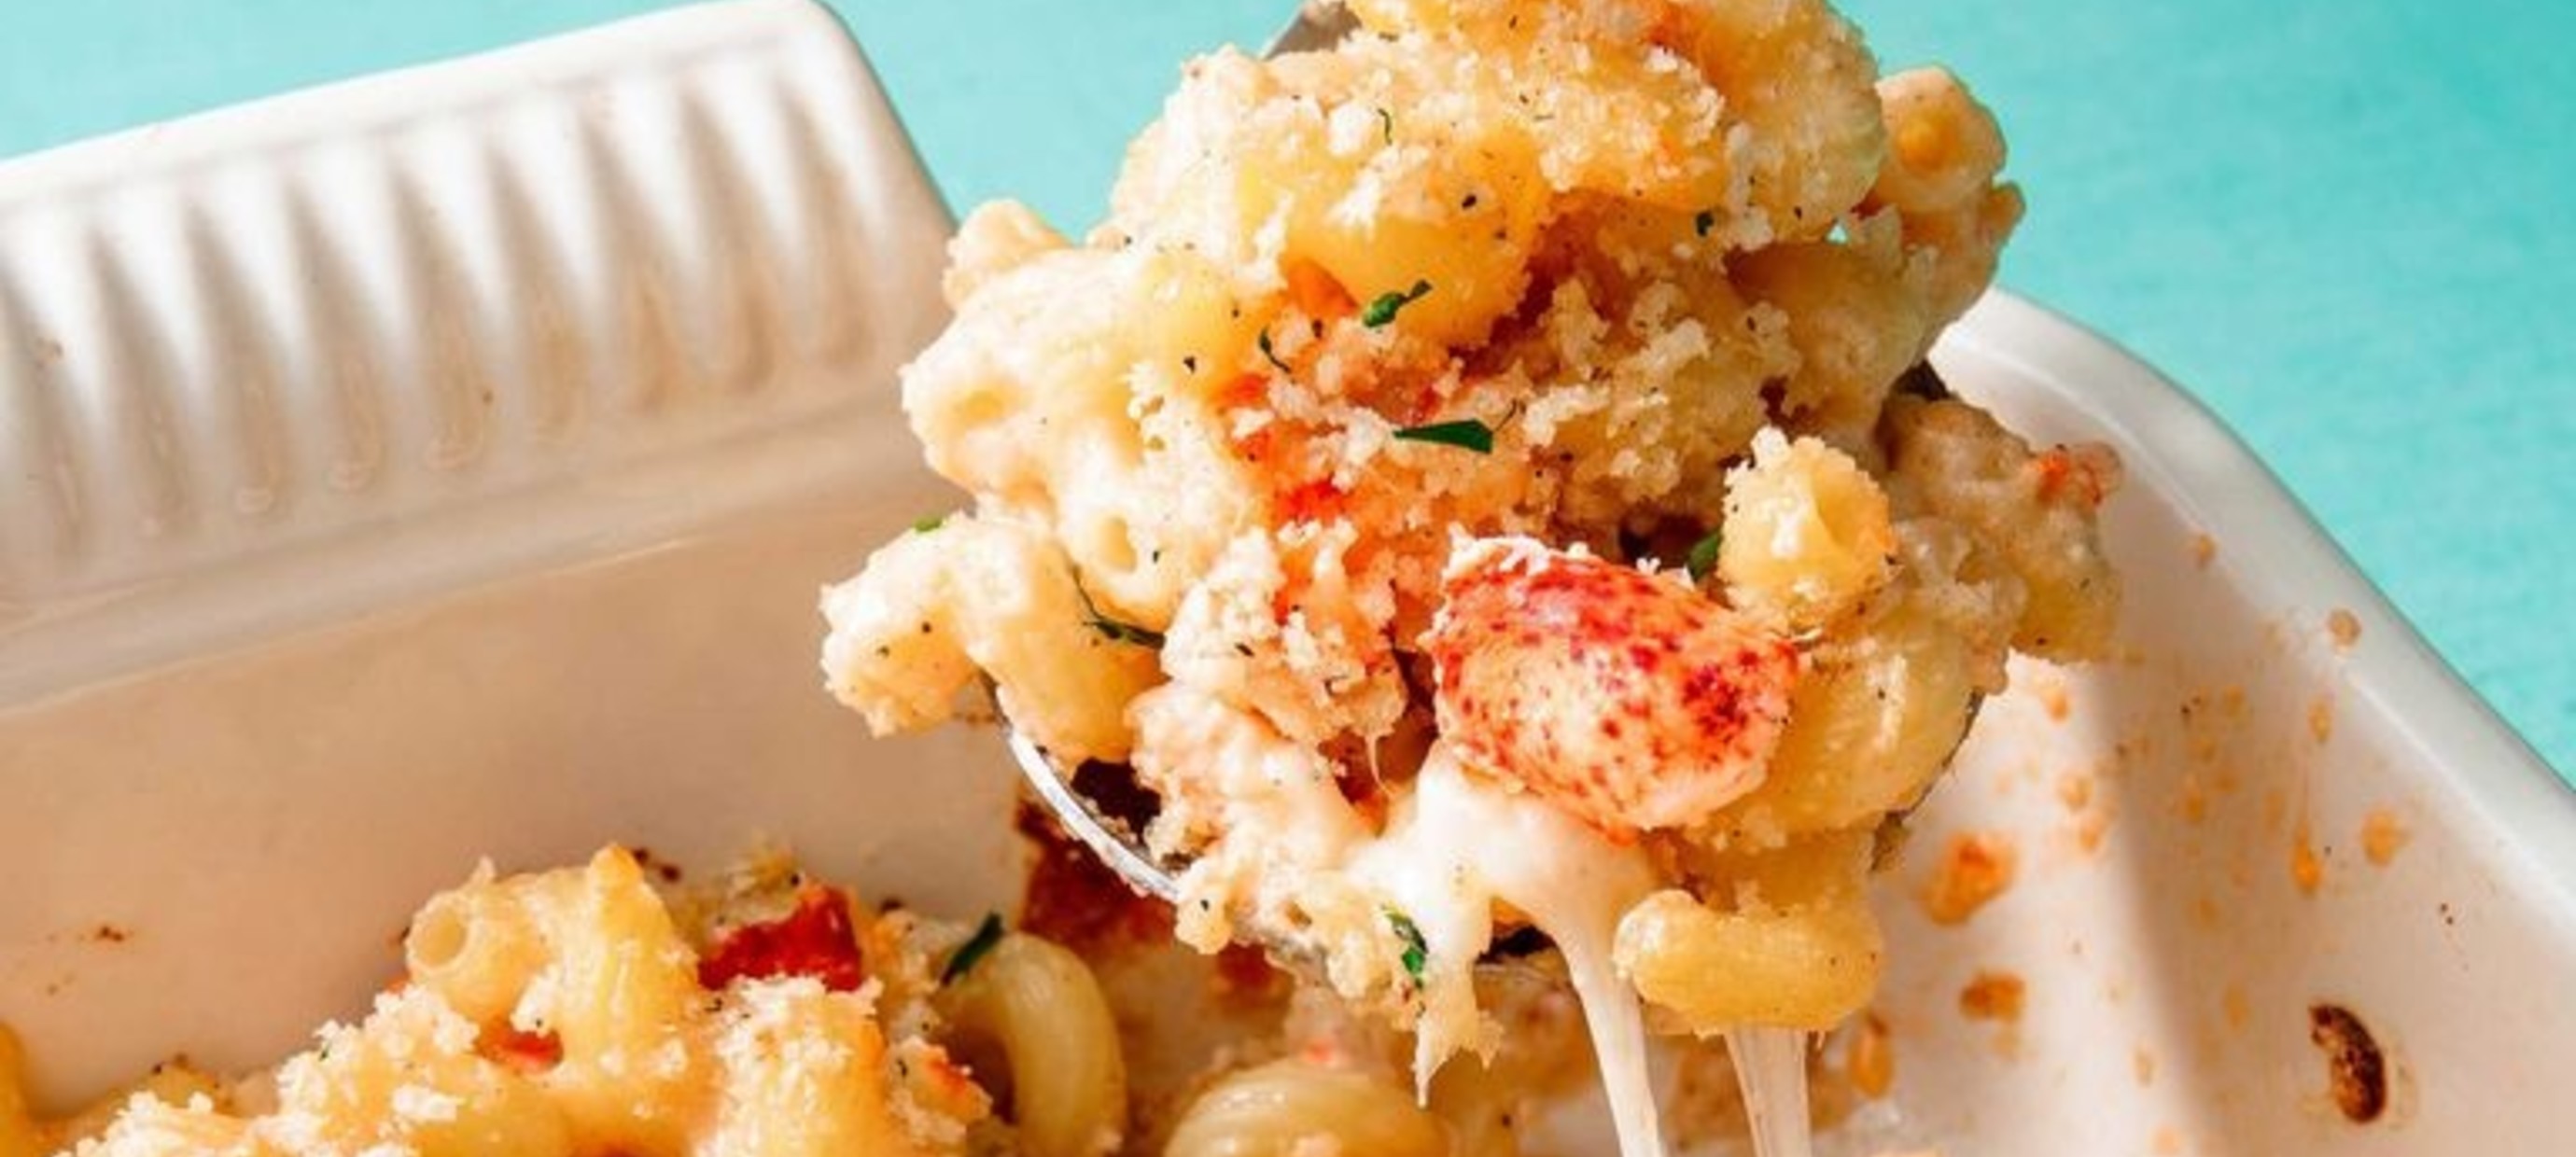 Lobster Mac & Cheese for 2